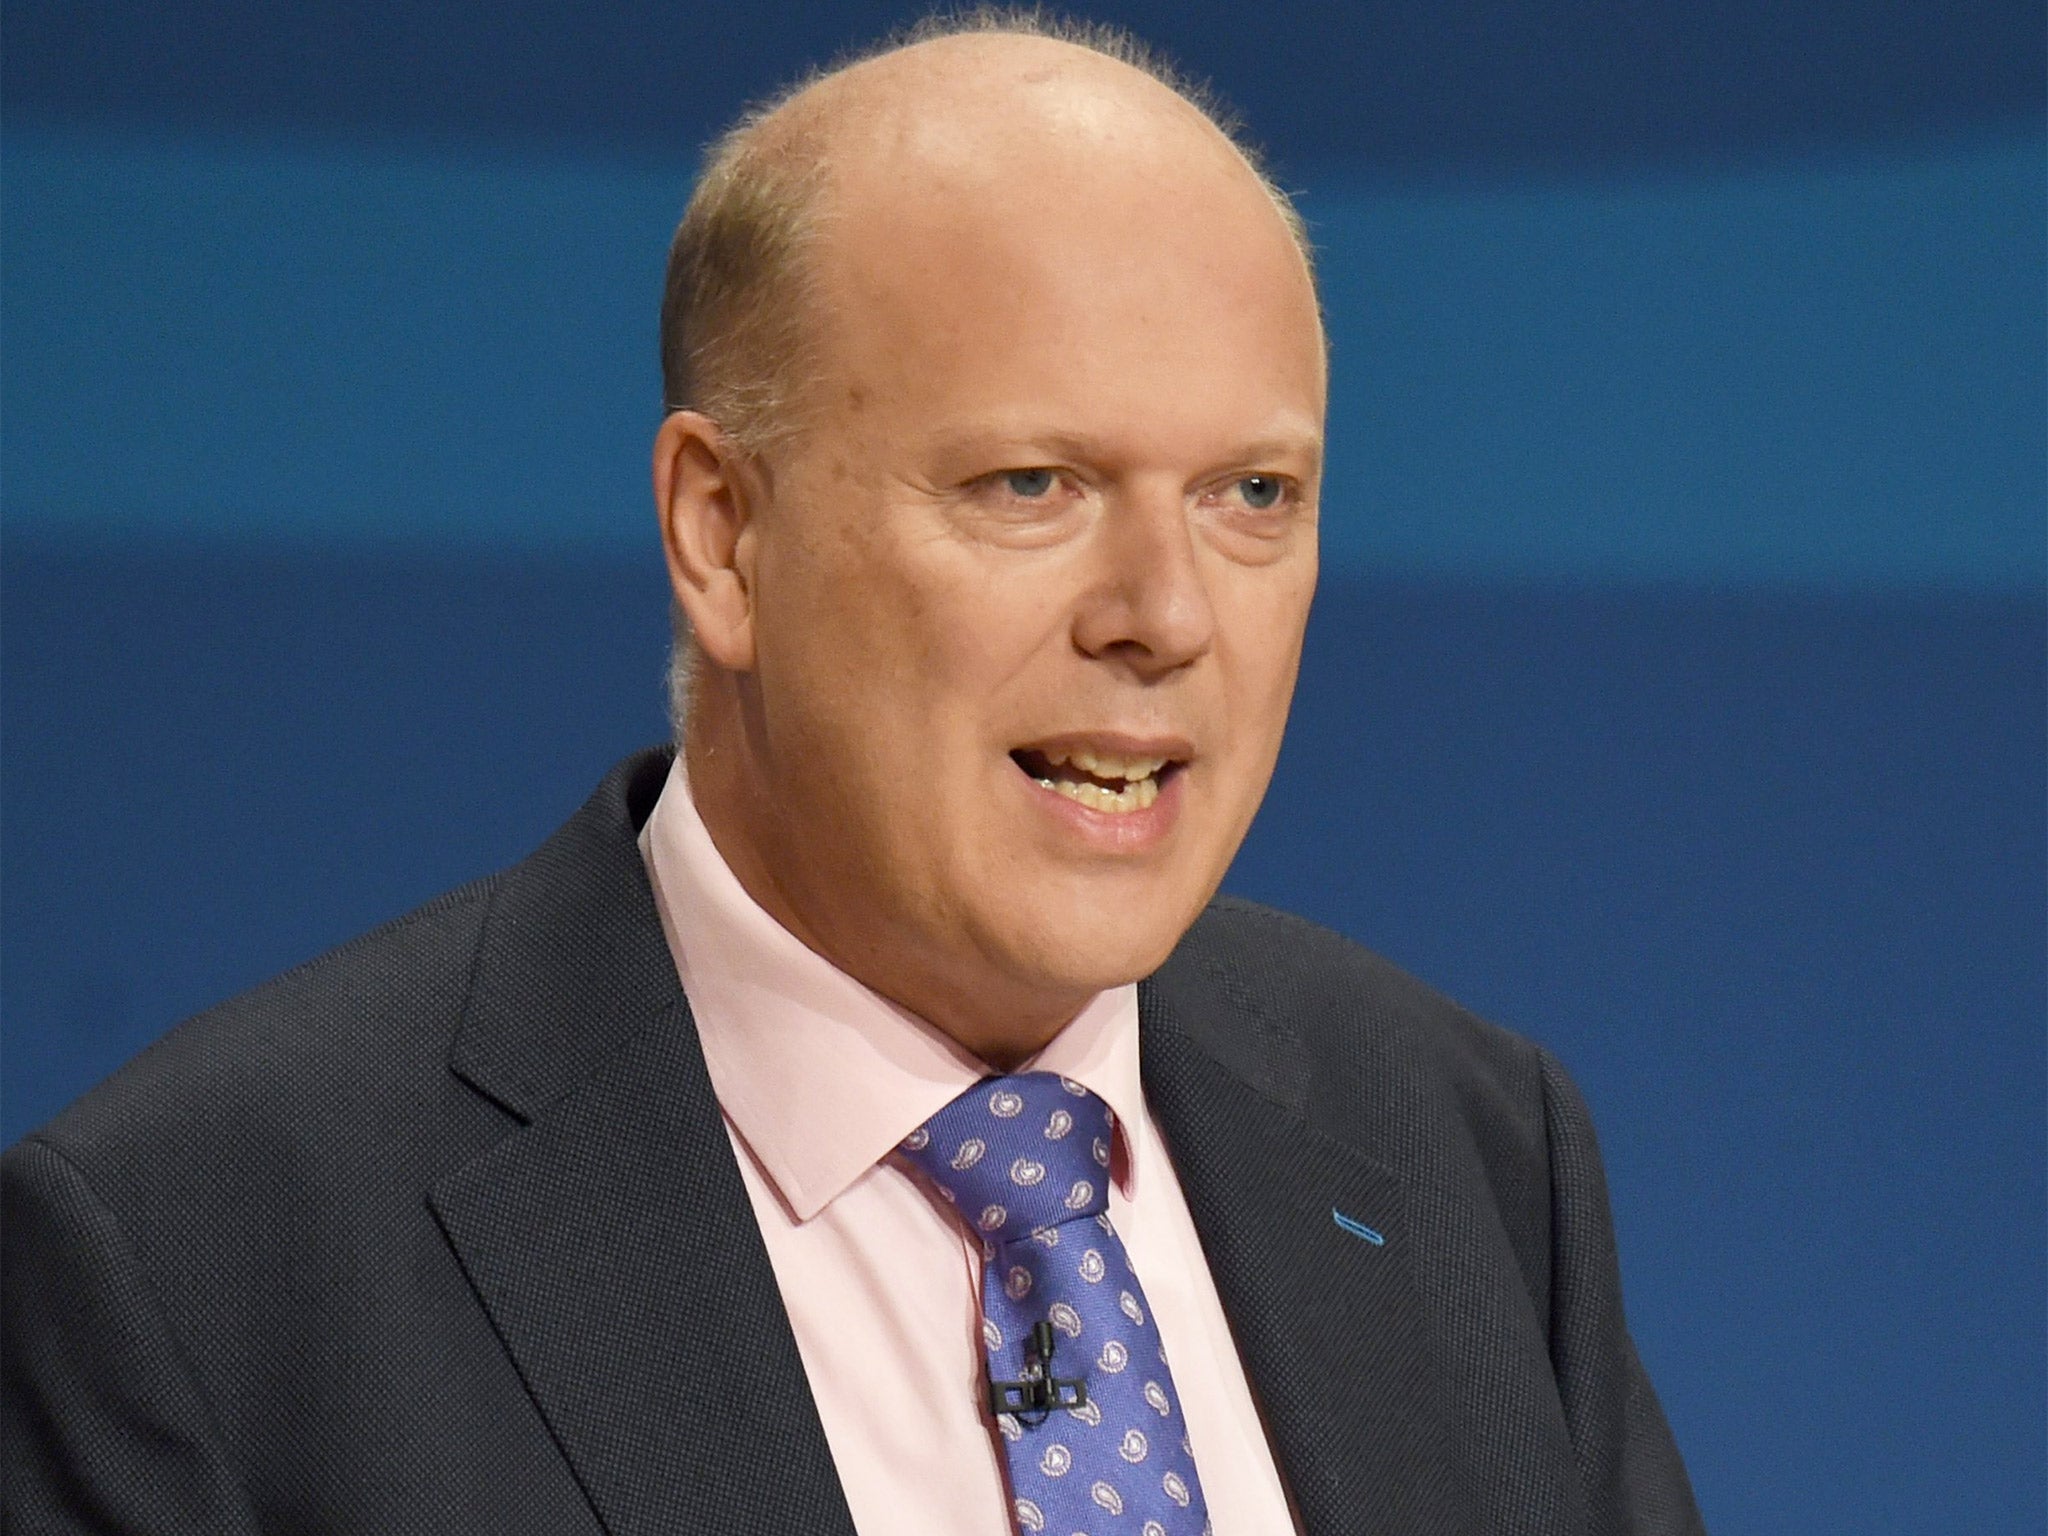 Former Secretary of State for Justice, Chris Grayling